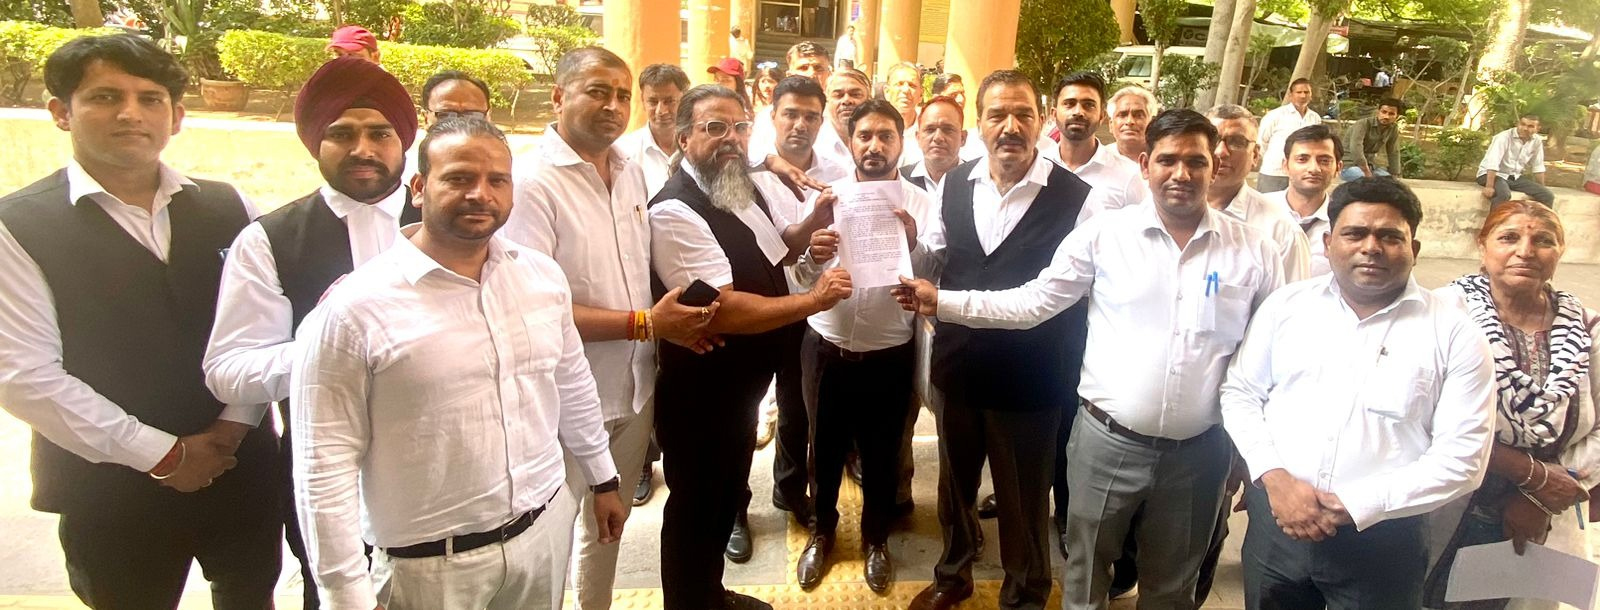 Lawyers protested against same-sex marriage by giving memorandum to the President and the Prime Minister